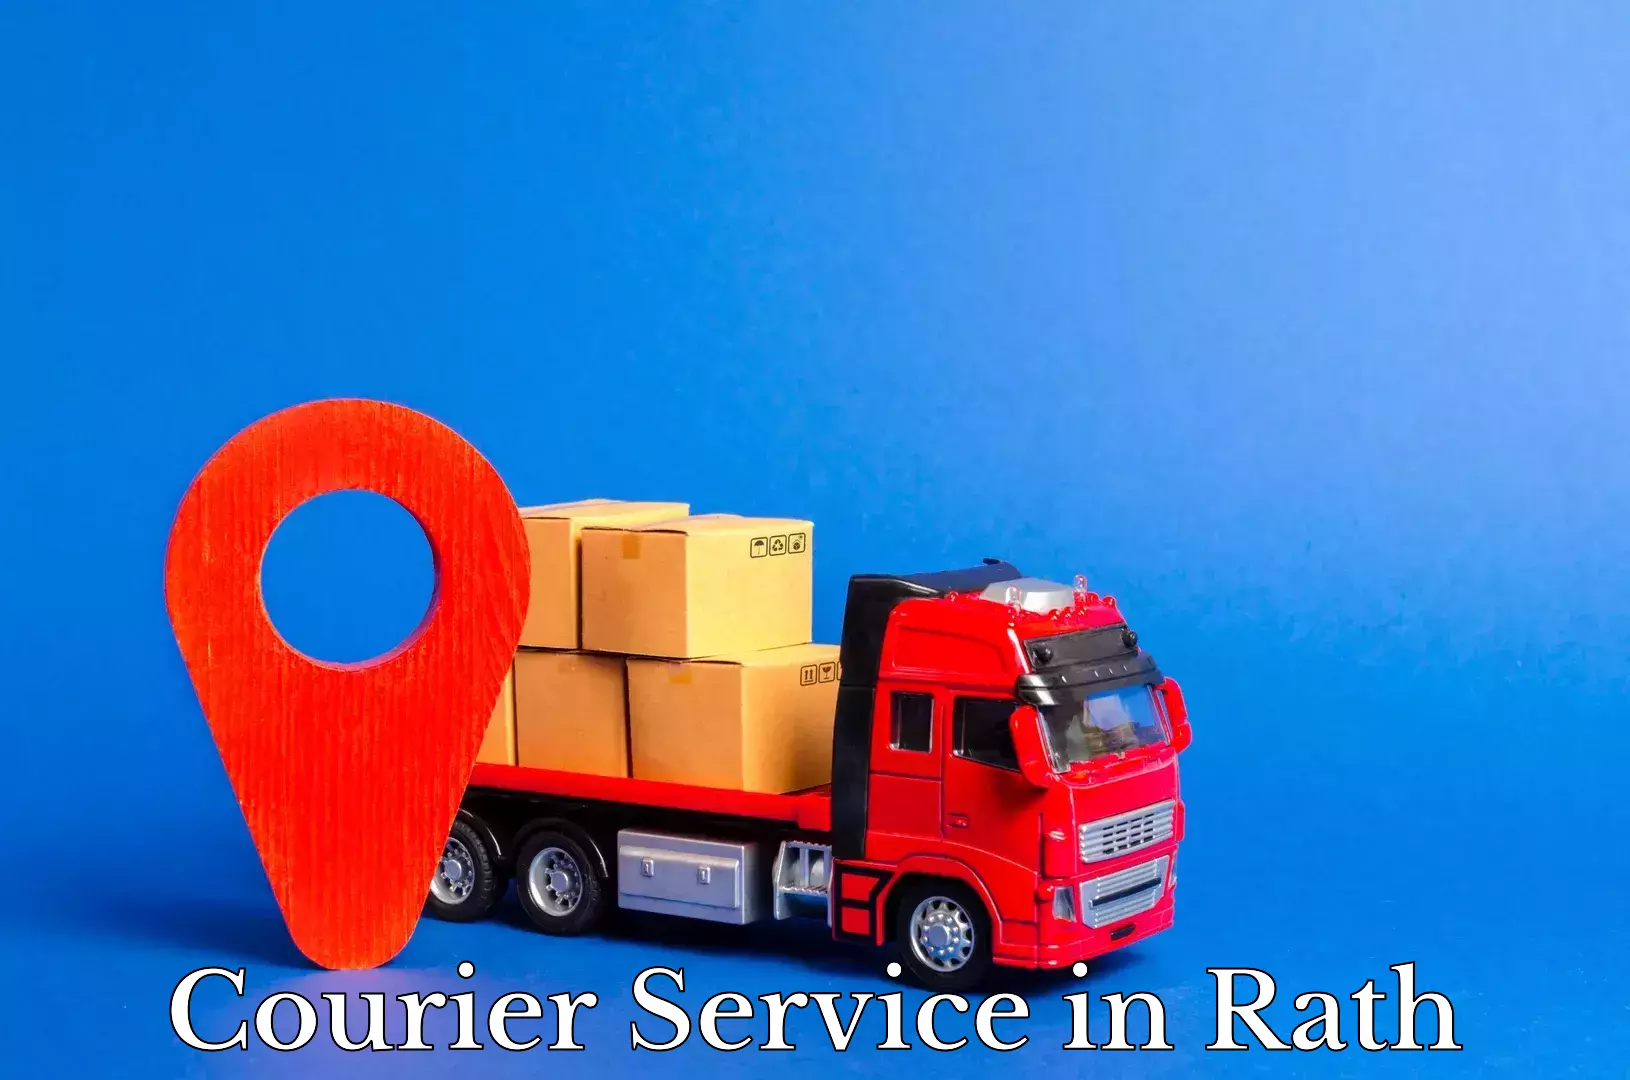 Remote area delivery in Rath